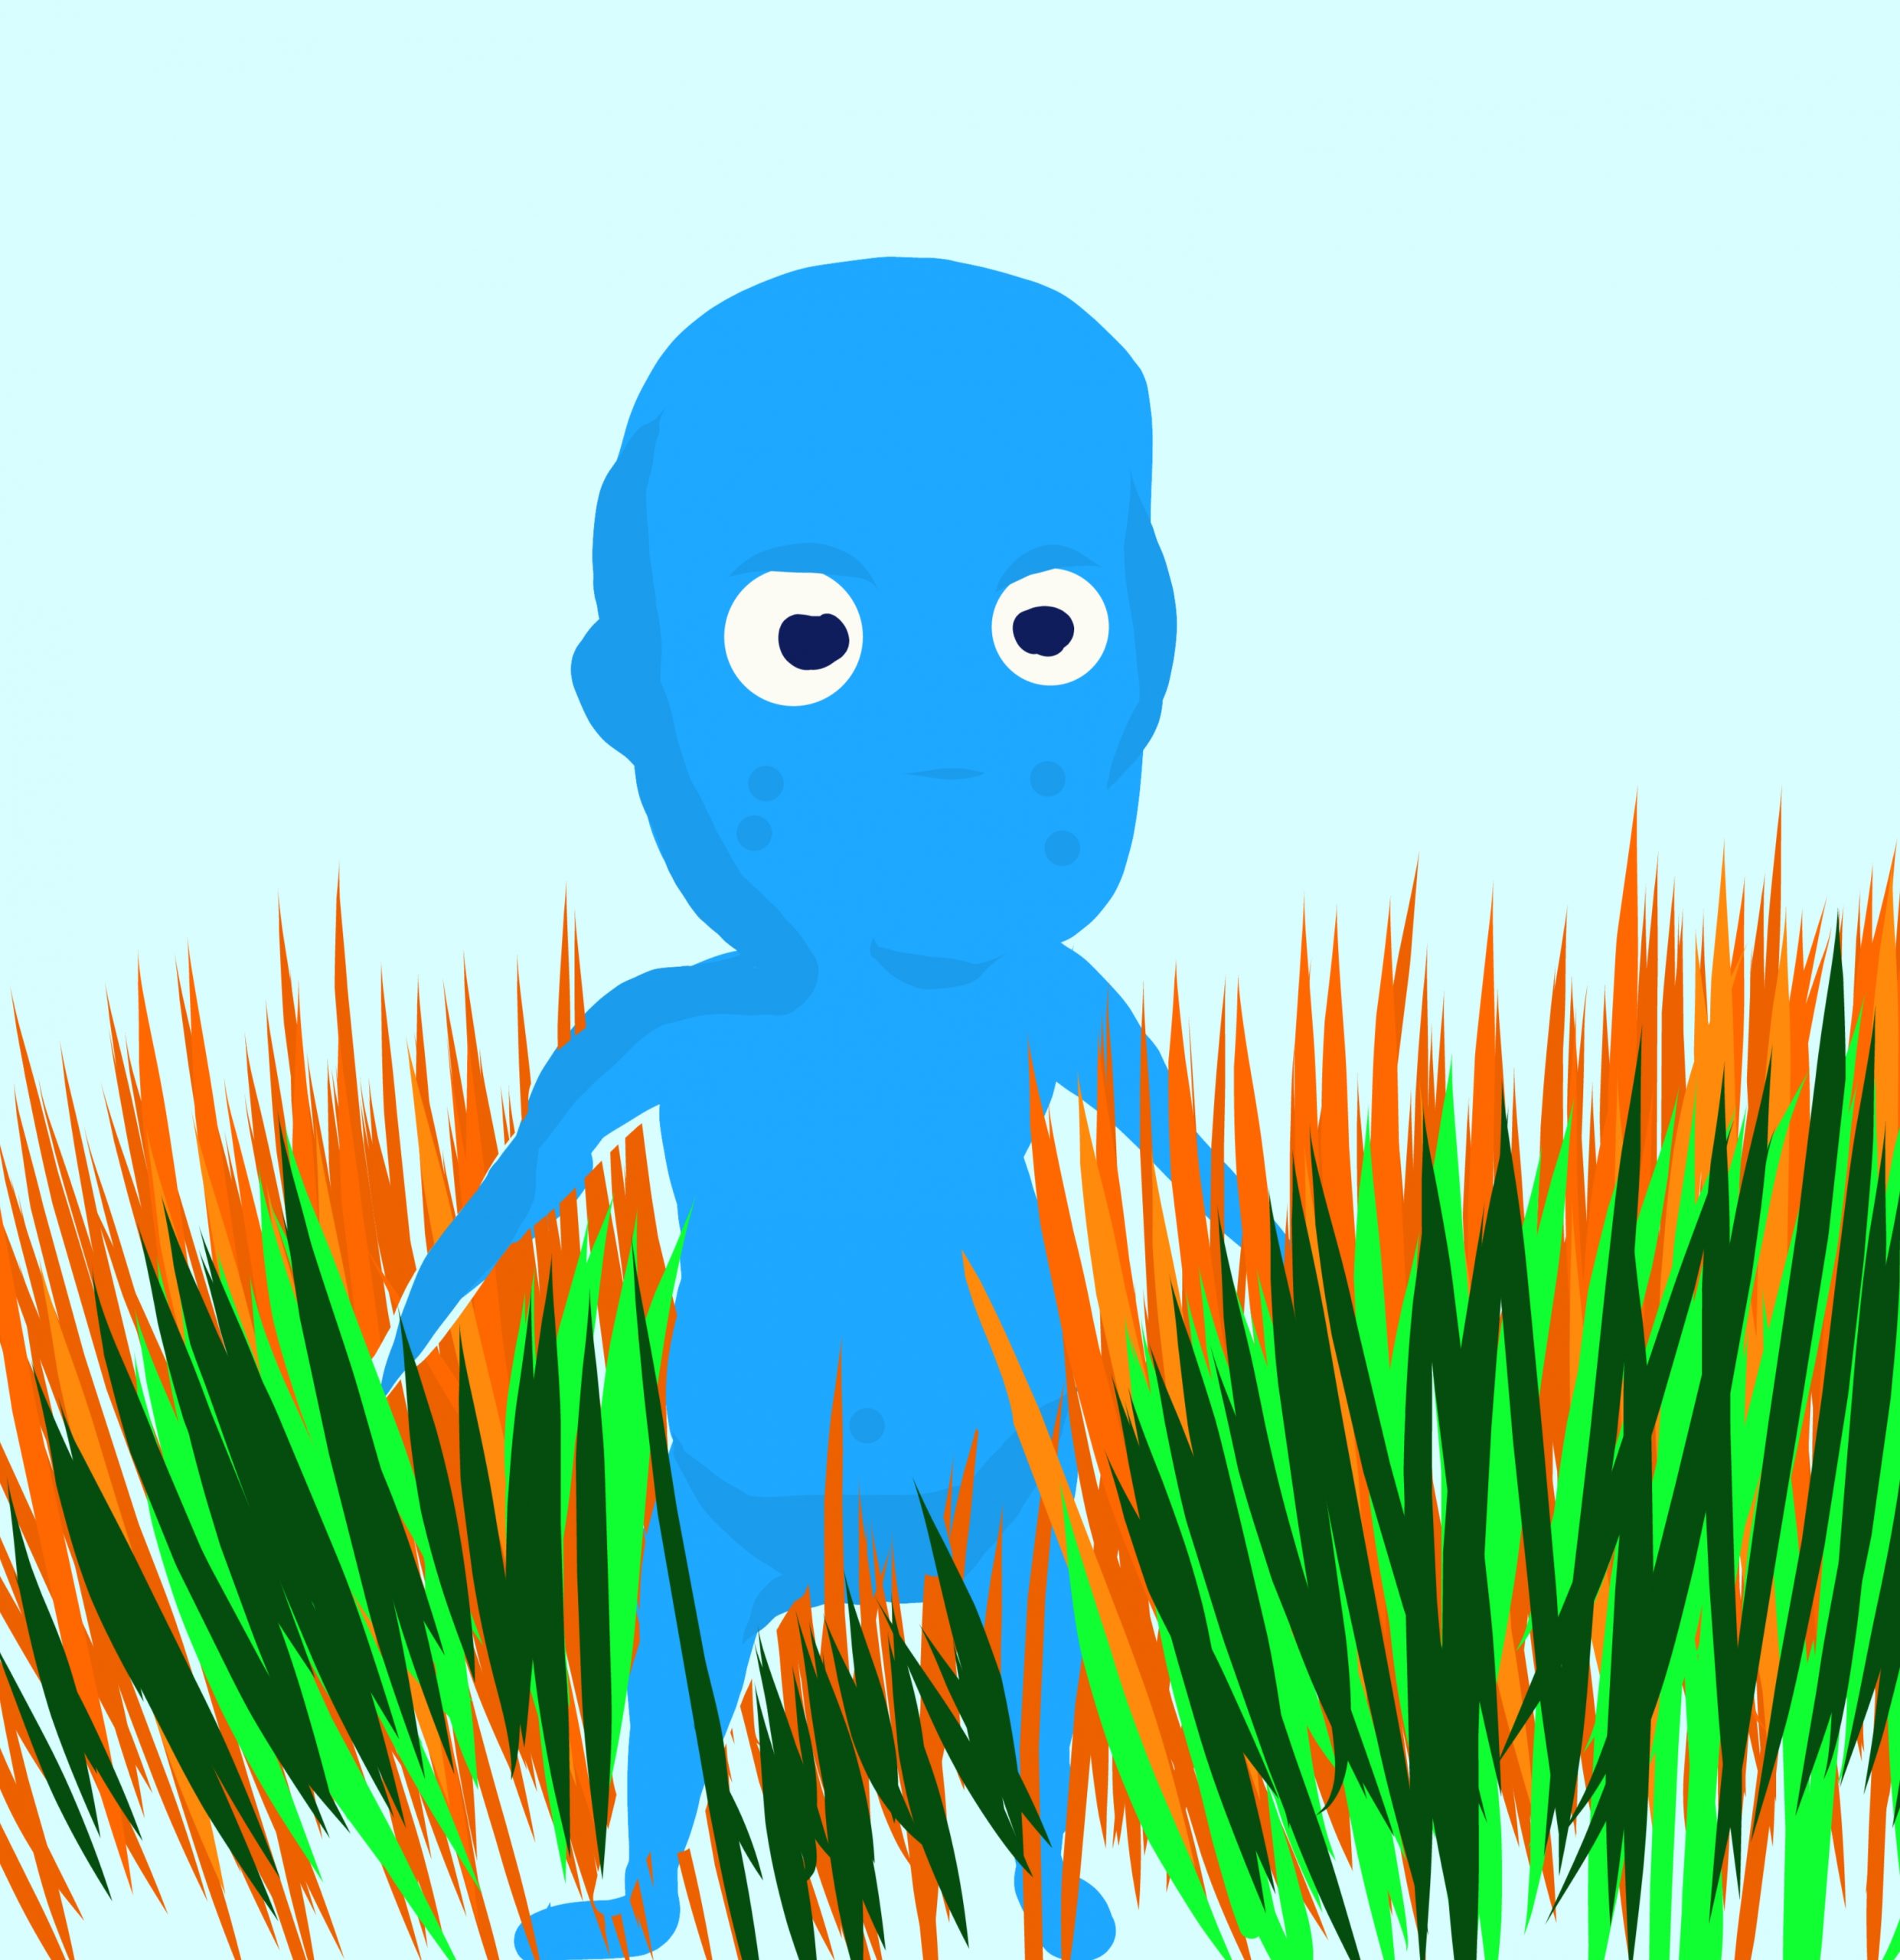 A kid and grass illustration